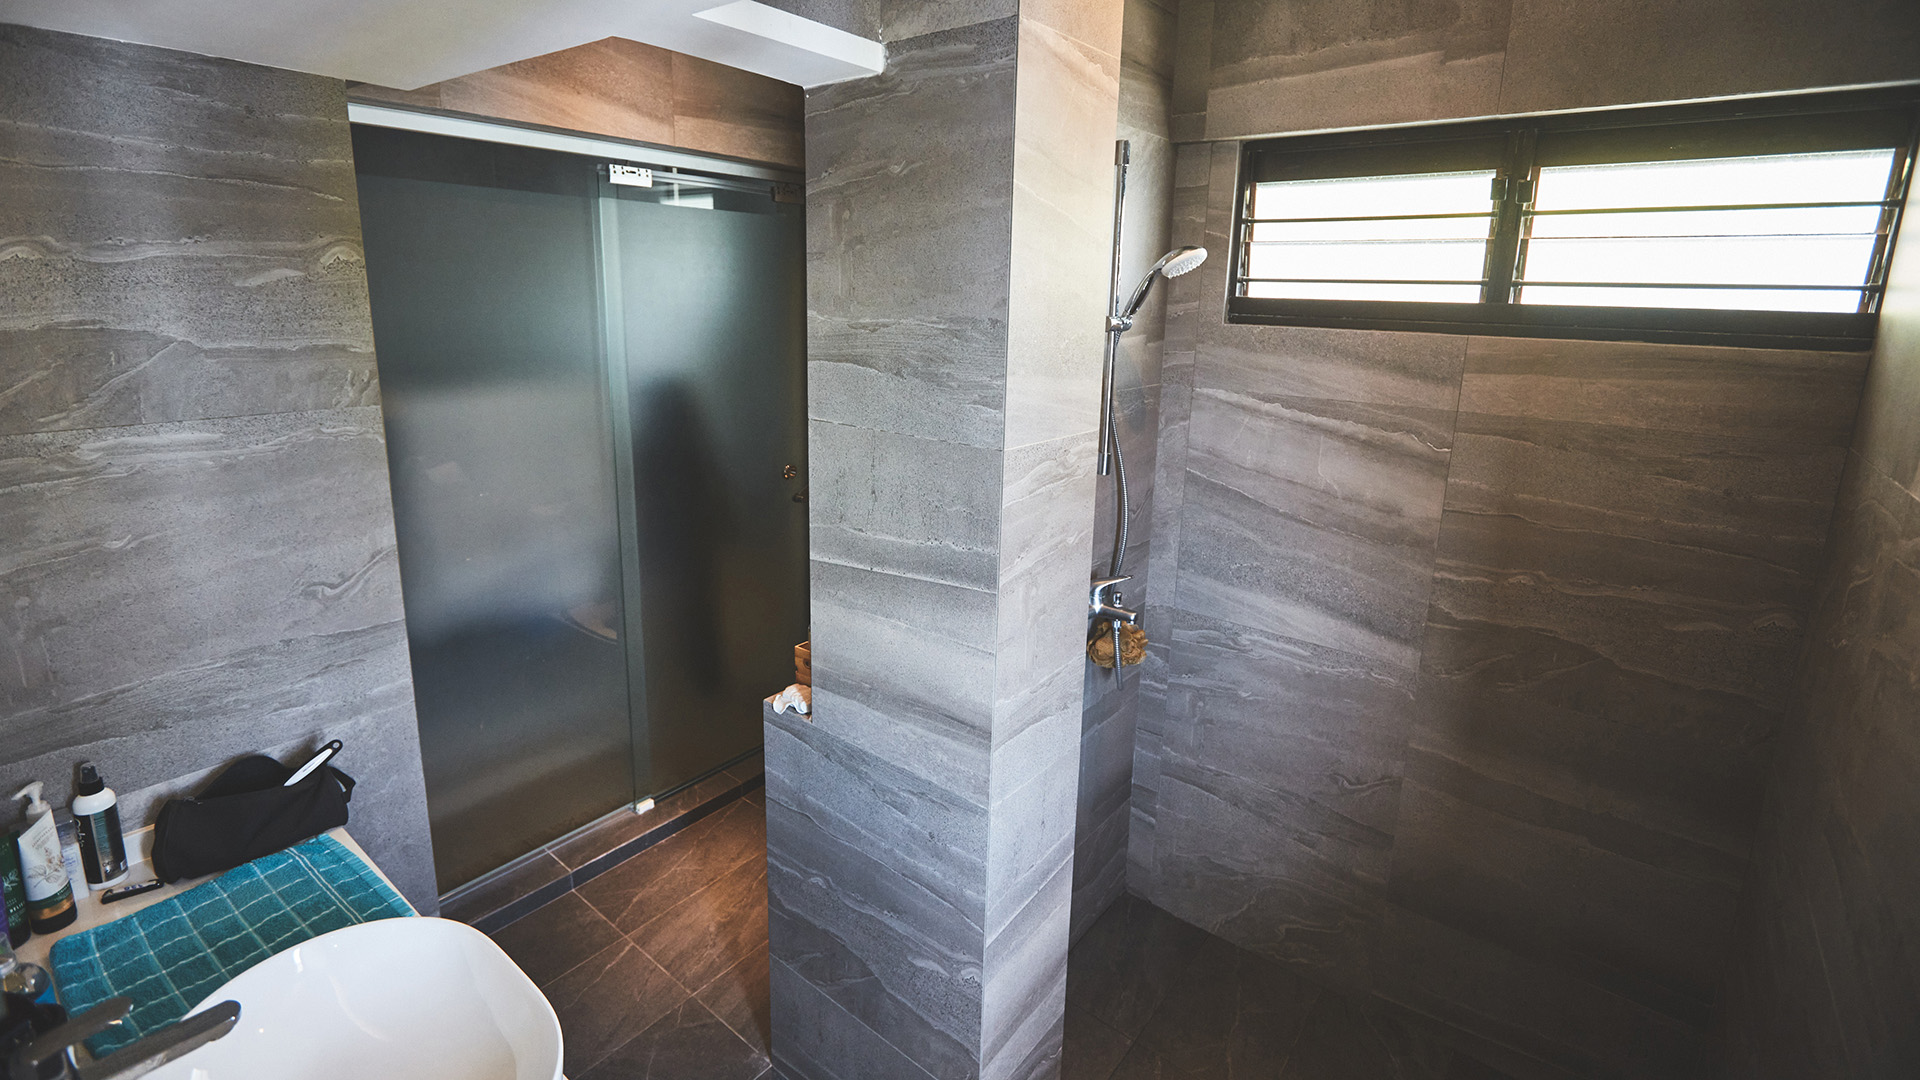 The ensuite and common bathrooms were combined to create a bigger space